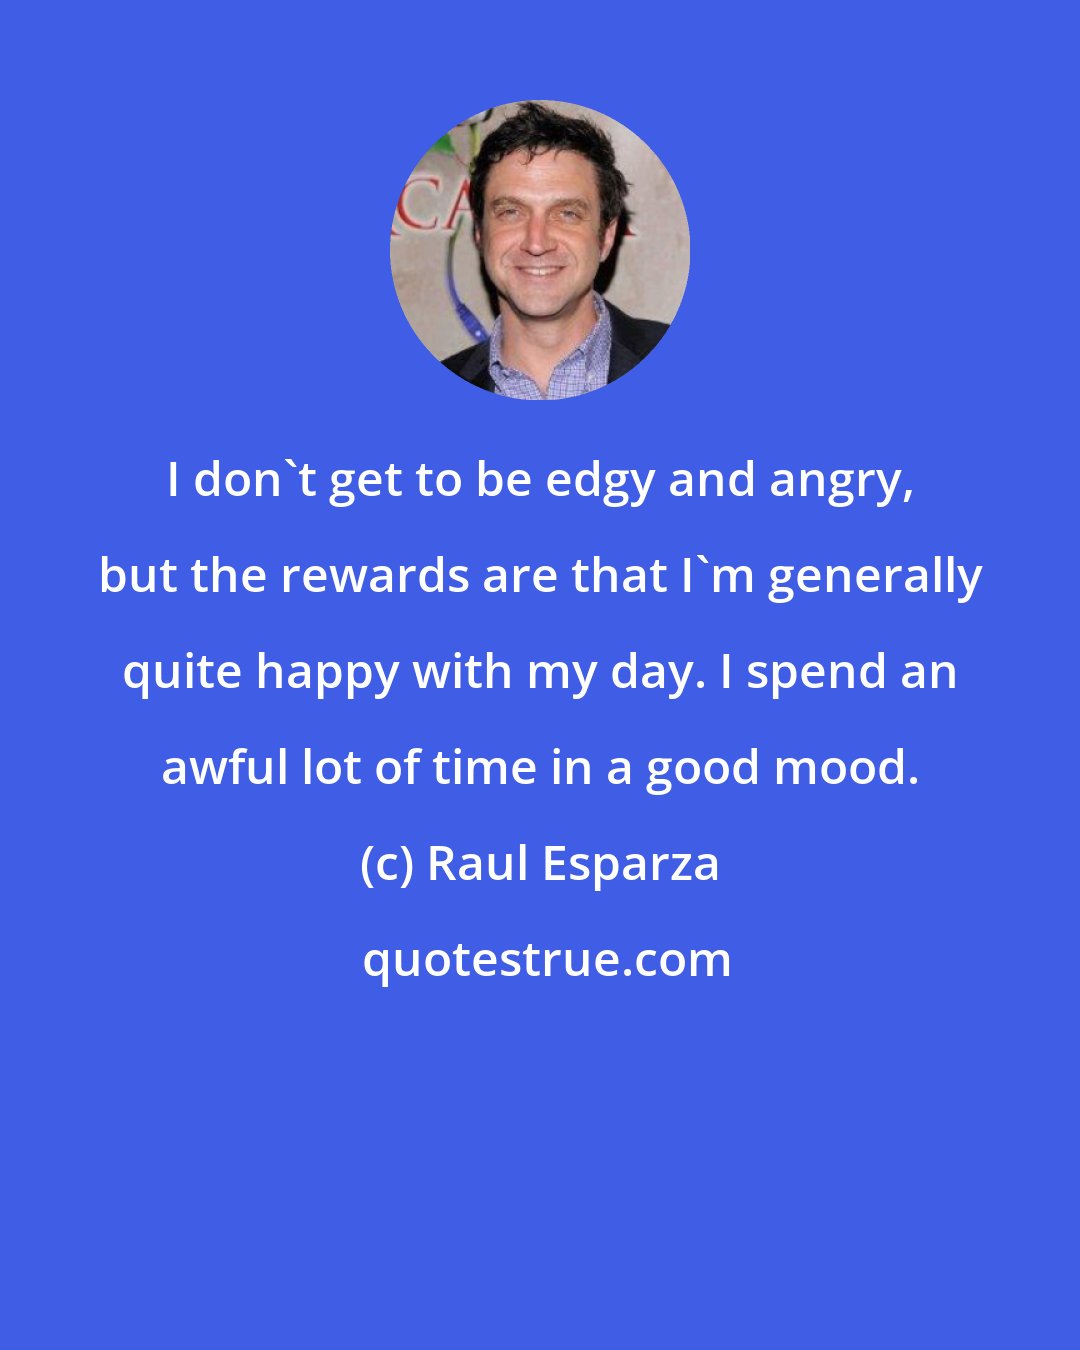 Raul Esparza: I don't get to be edgy and angry, but the rewards are that I'm generally quite happy with my day. I spend an awful lot of time in a good mood.